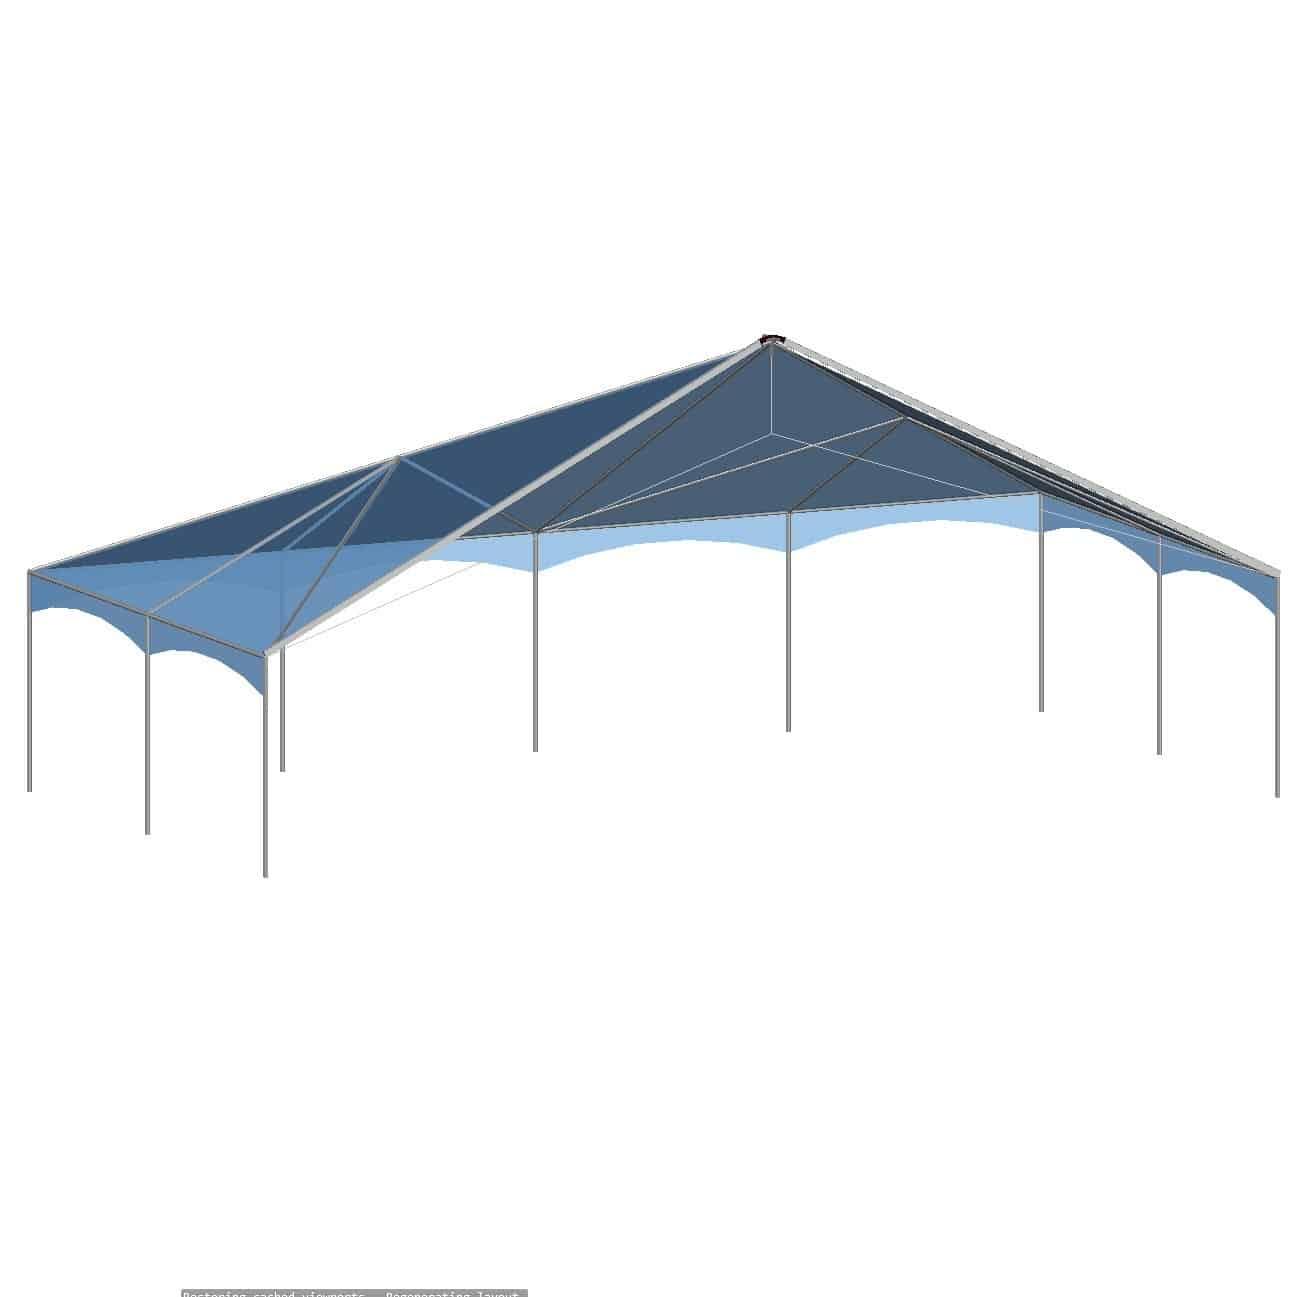 40x20 Stage Canopy - Keder track – Central Tent